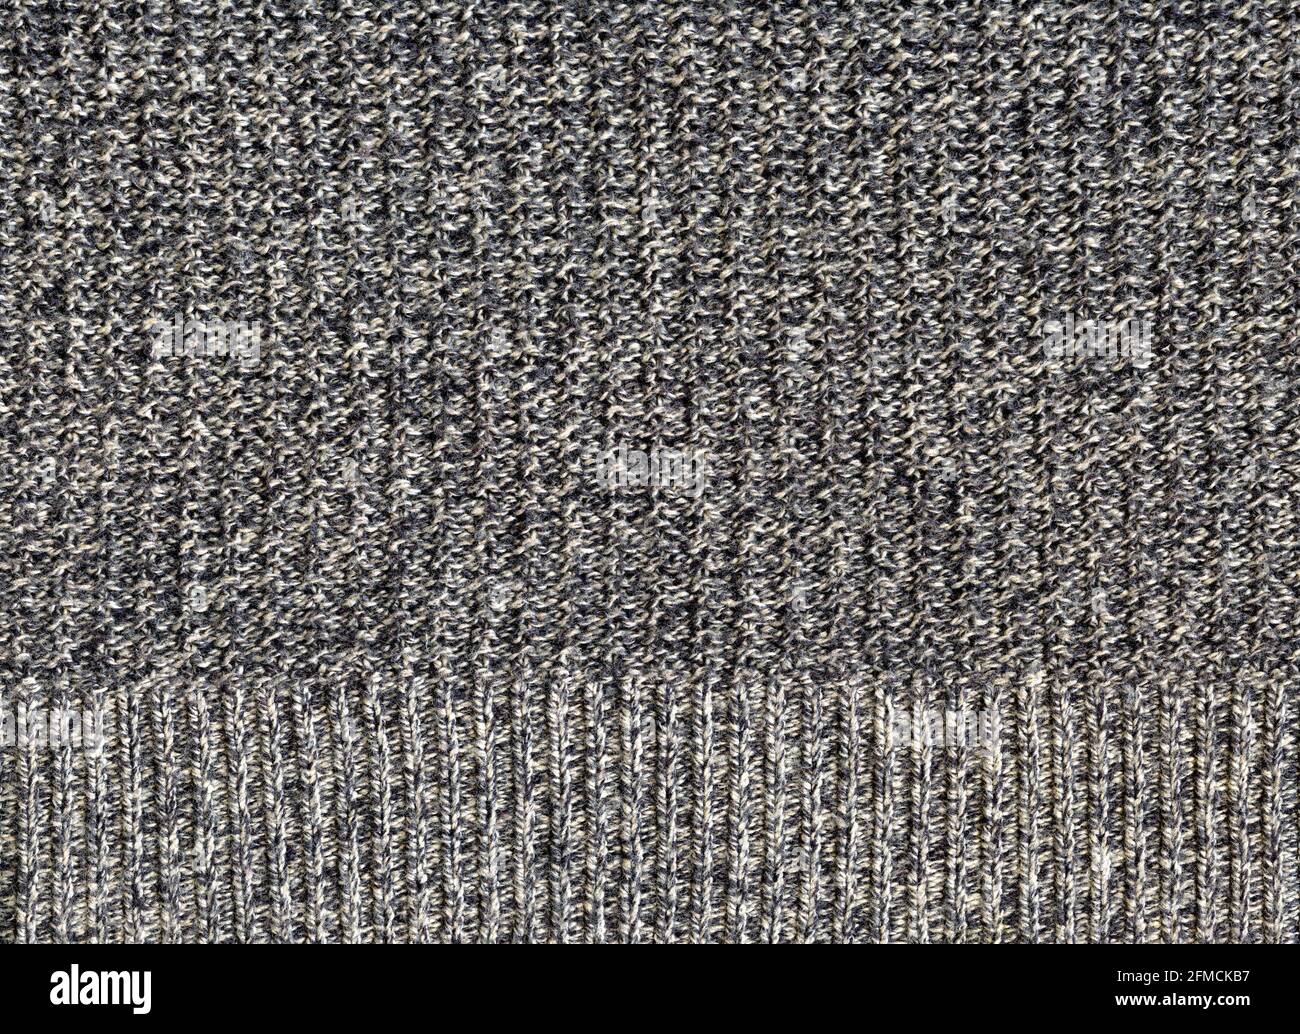 A flat section of knitted grey and white cotton including a border hem Stock Photo